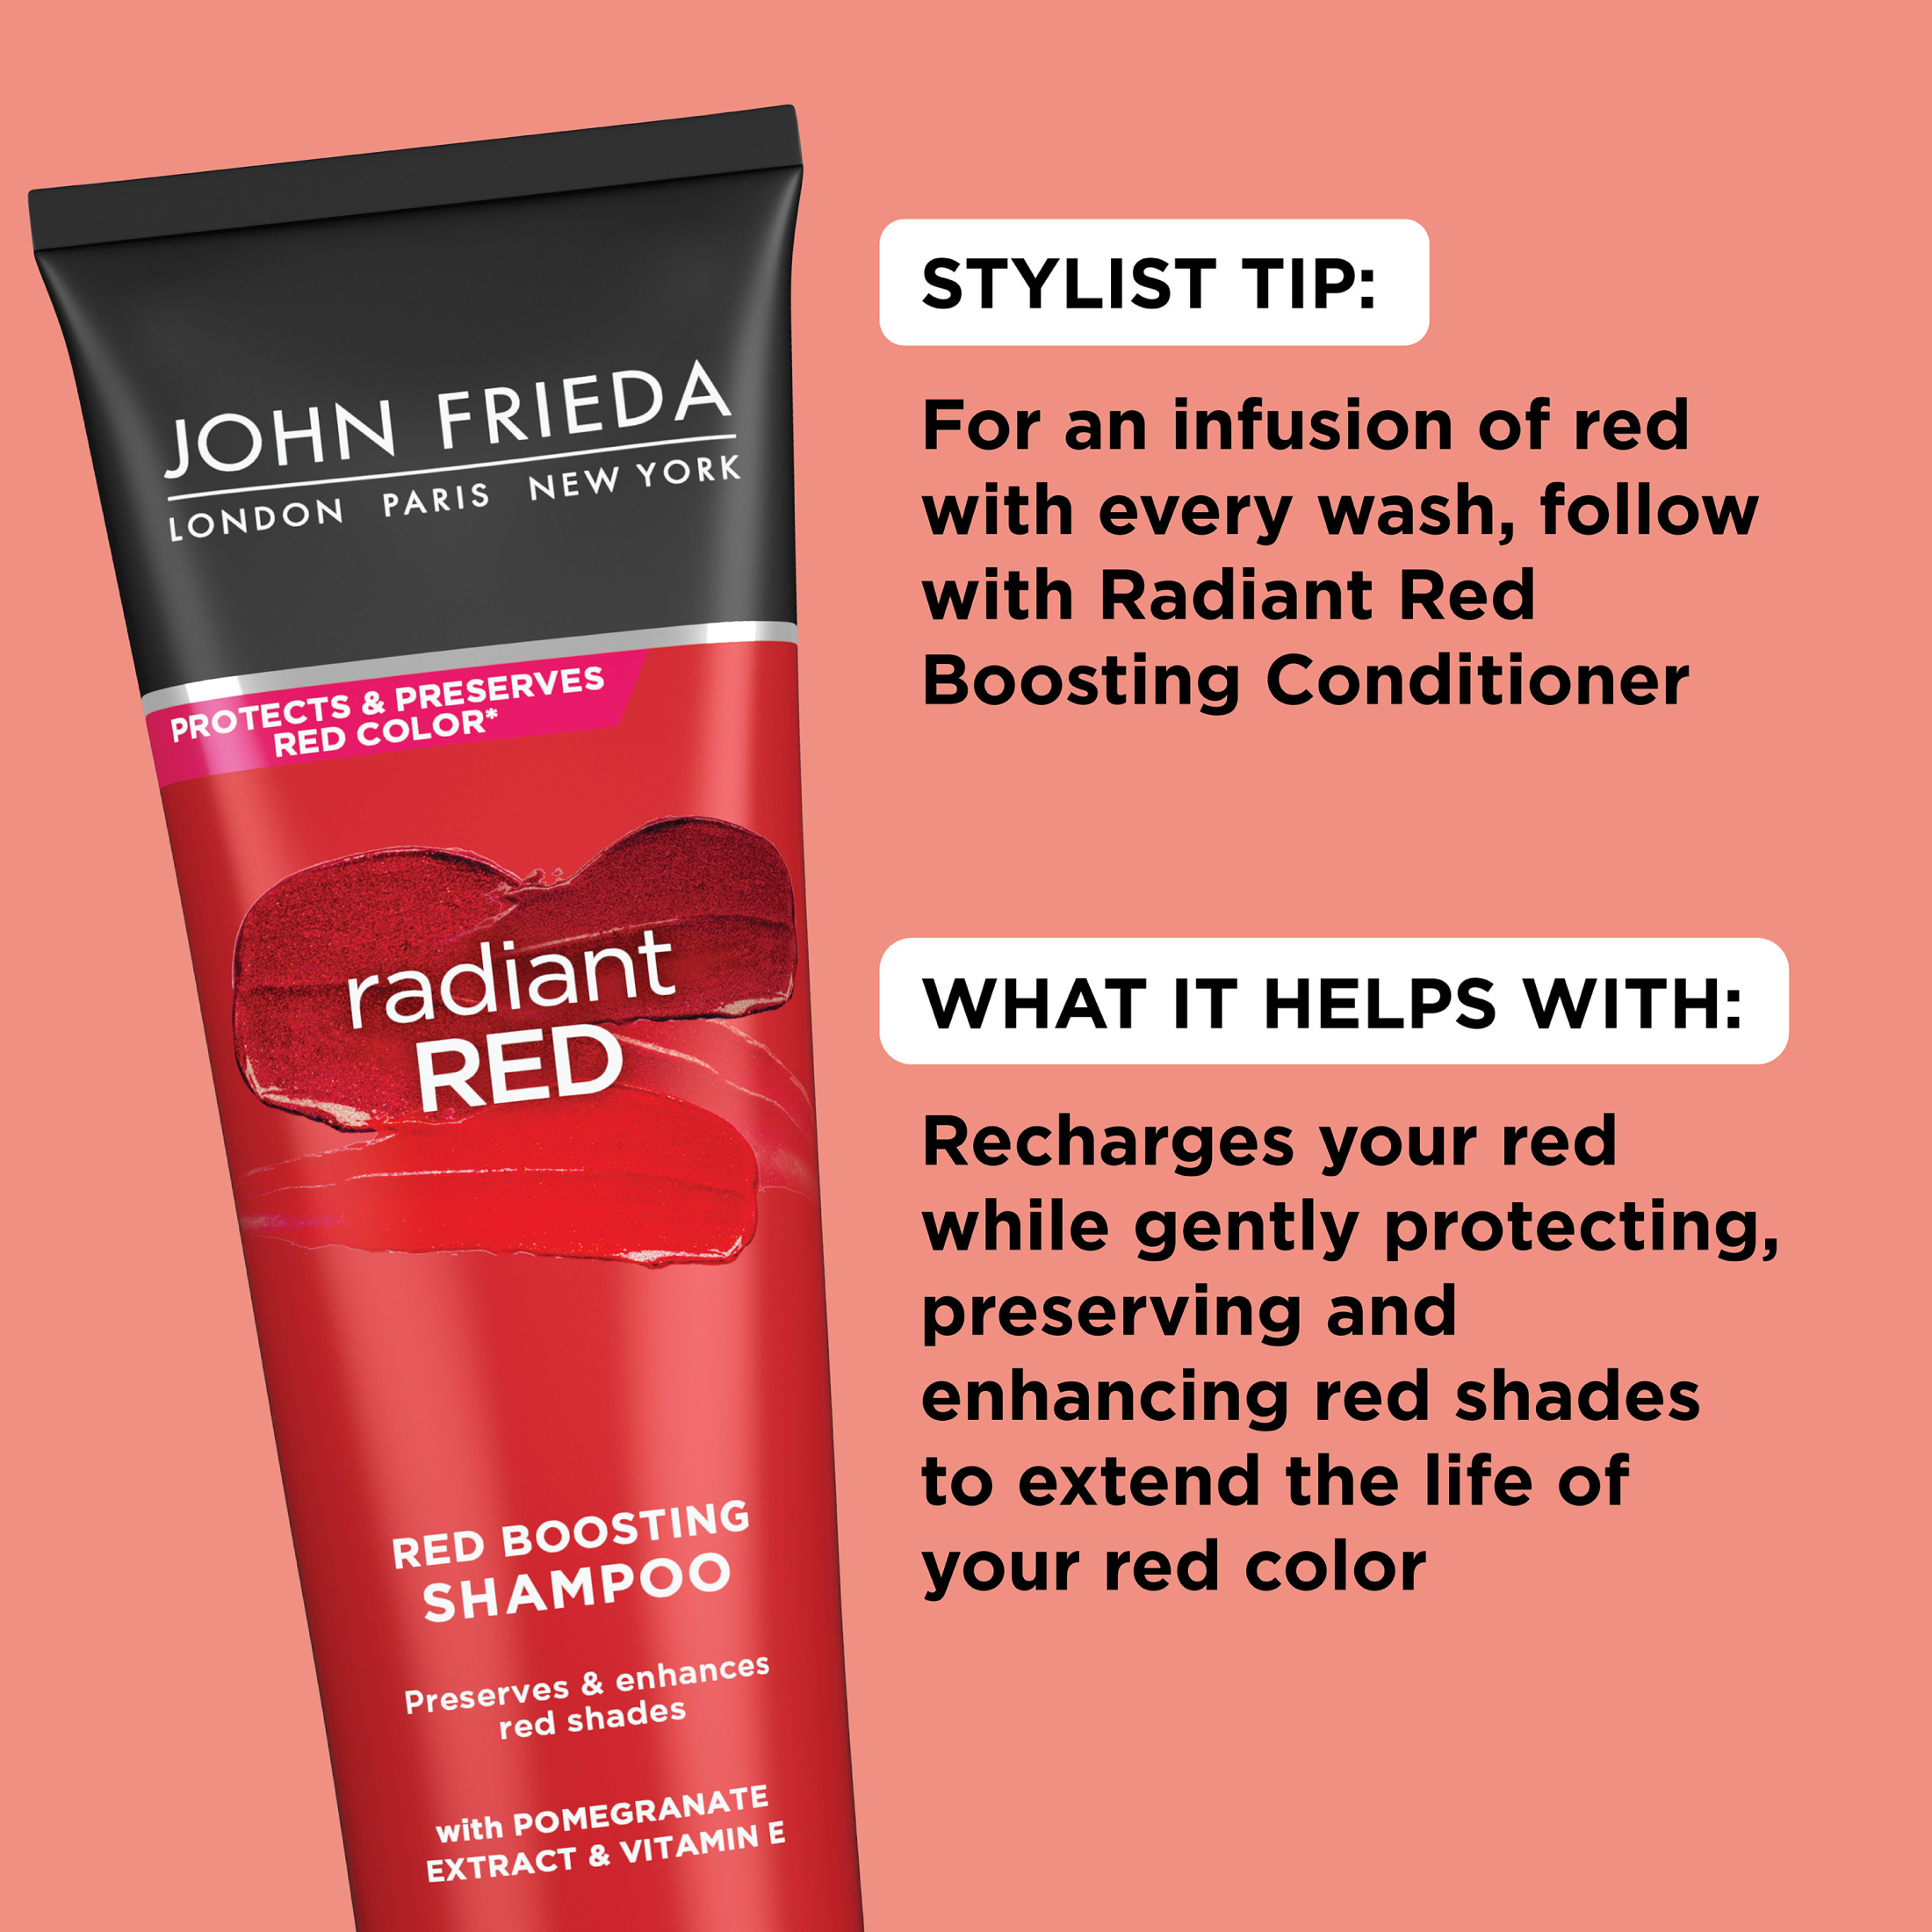 John Frieda Radiant Red Red Boosting Daily Shampoo, Color-Enhancing Shampoo for Red Hair, 8.3 fl oz - image 4 of 8